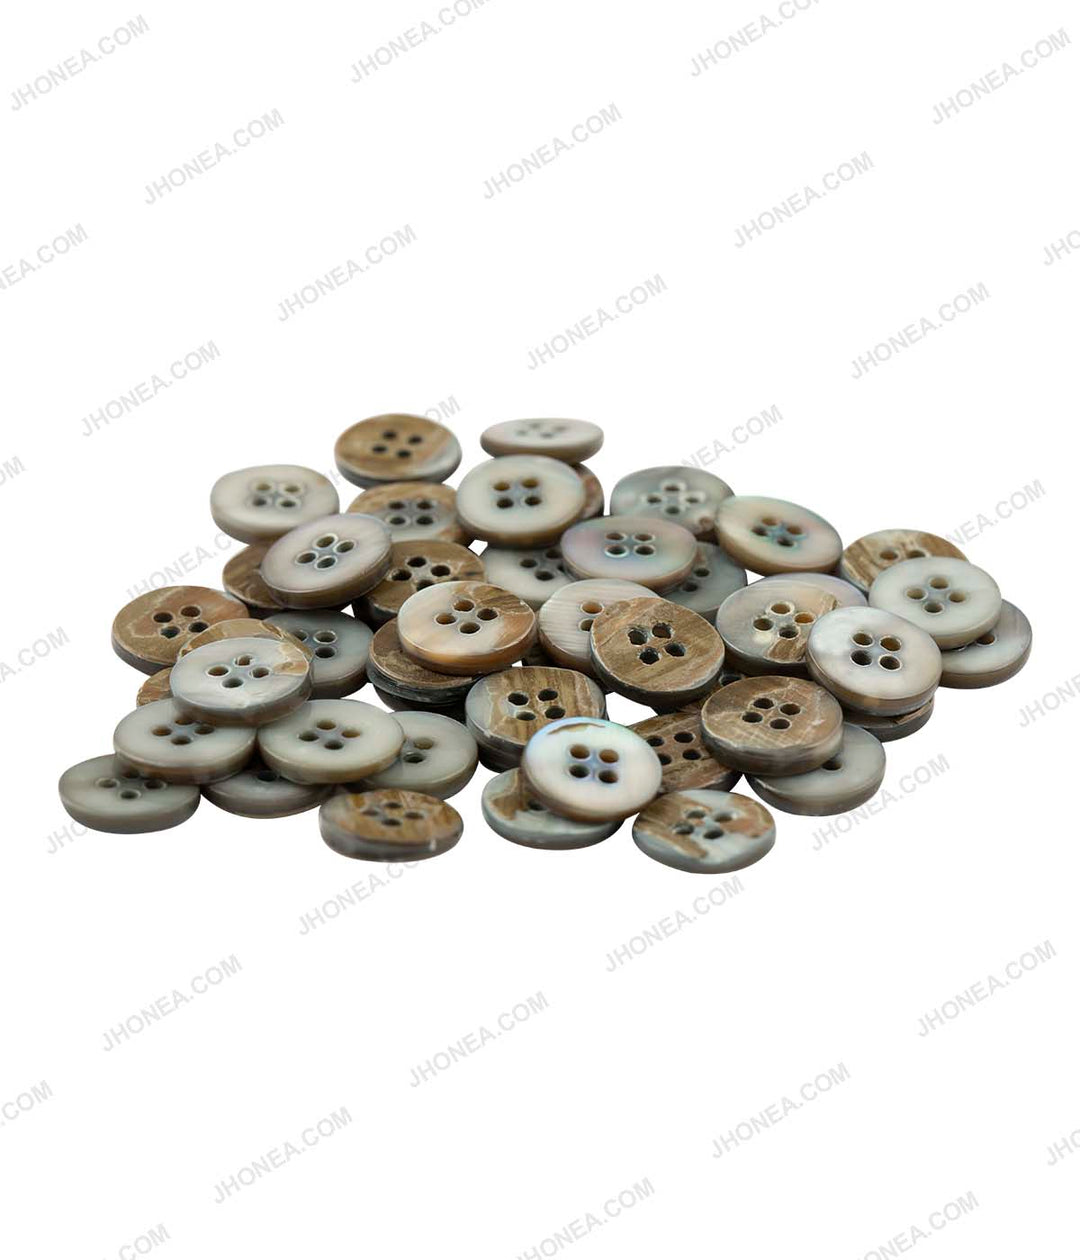 Glossy & Shiny Pearlescent Light Grey Shirt Buttons